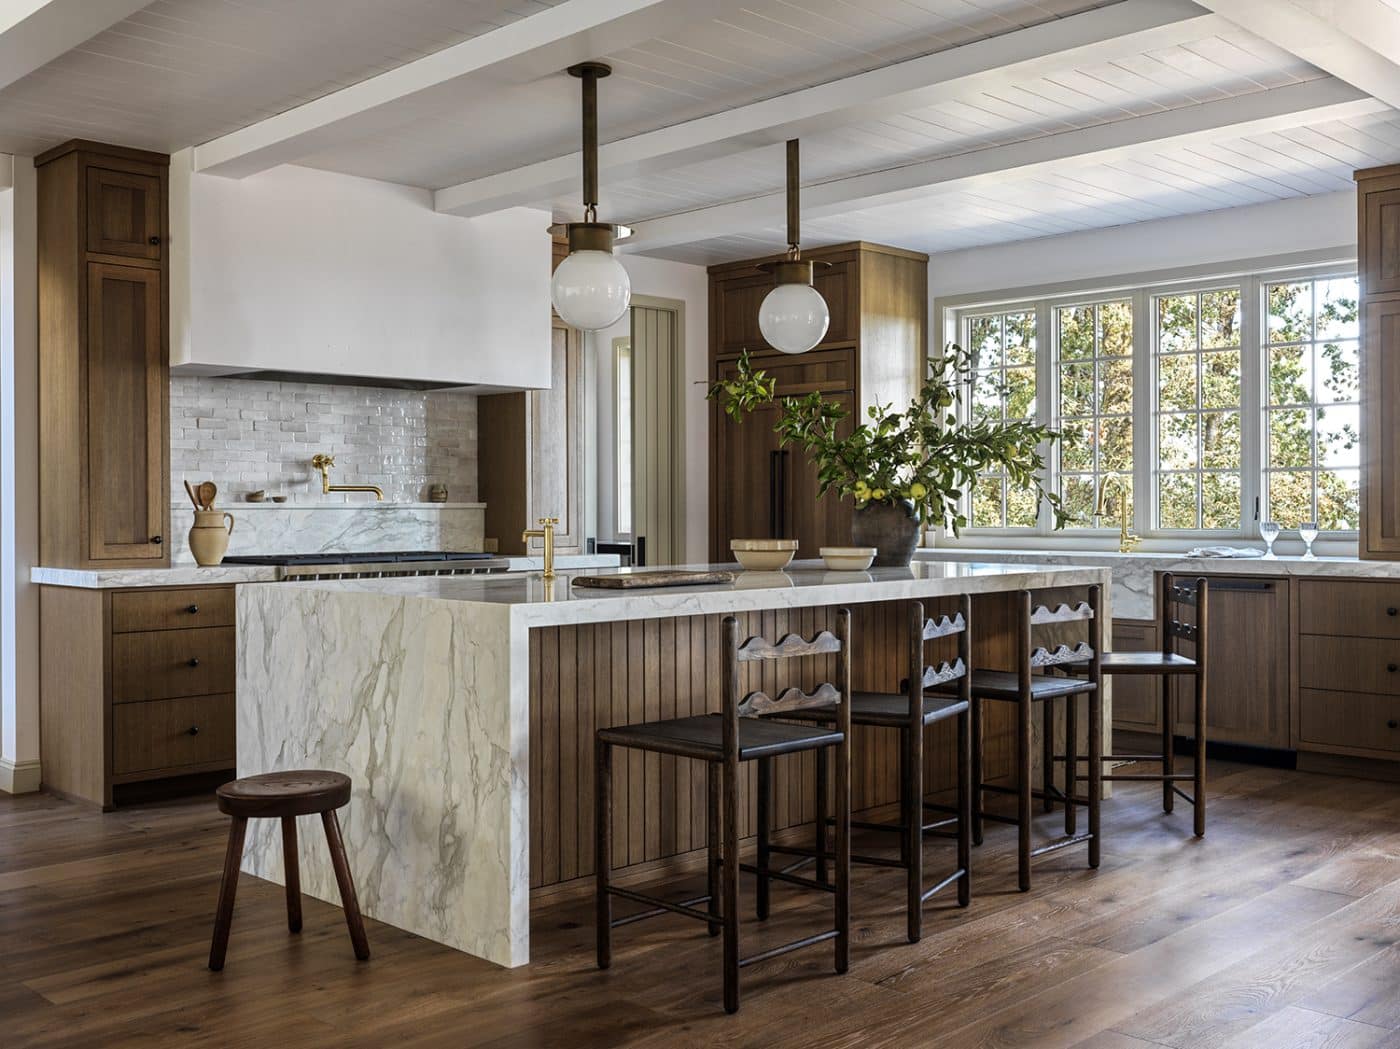 Light and Dwel's own Frankie stools line the marble-topped kitchen island, accompanied by a well-worn tripod milking stools.